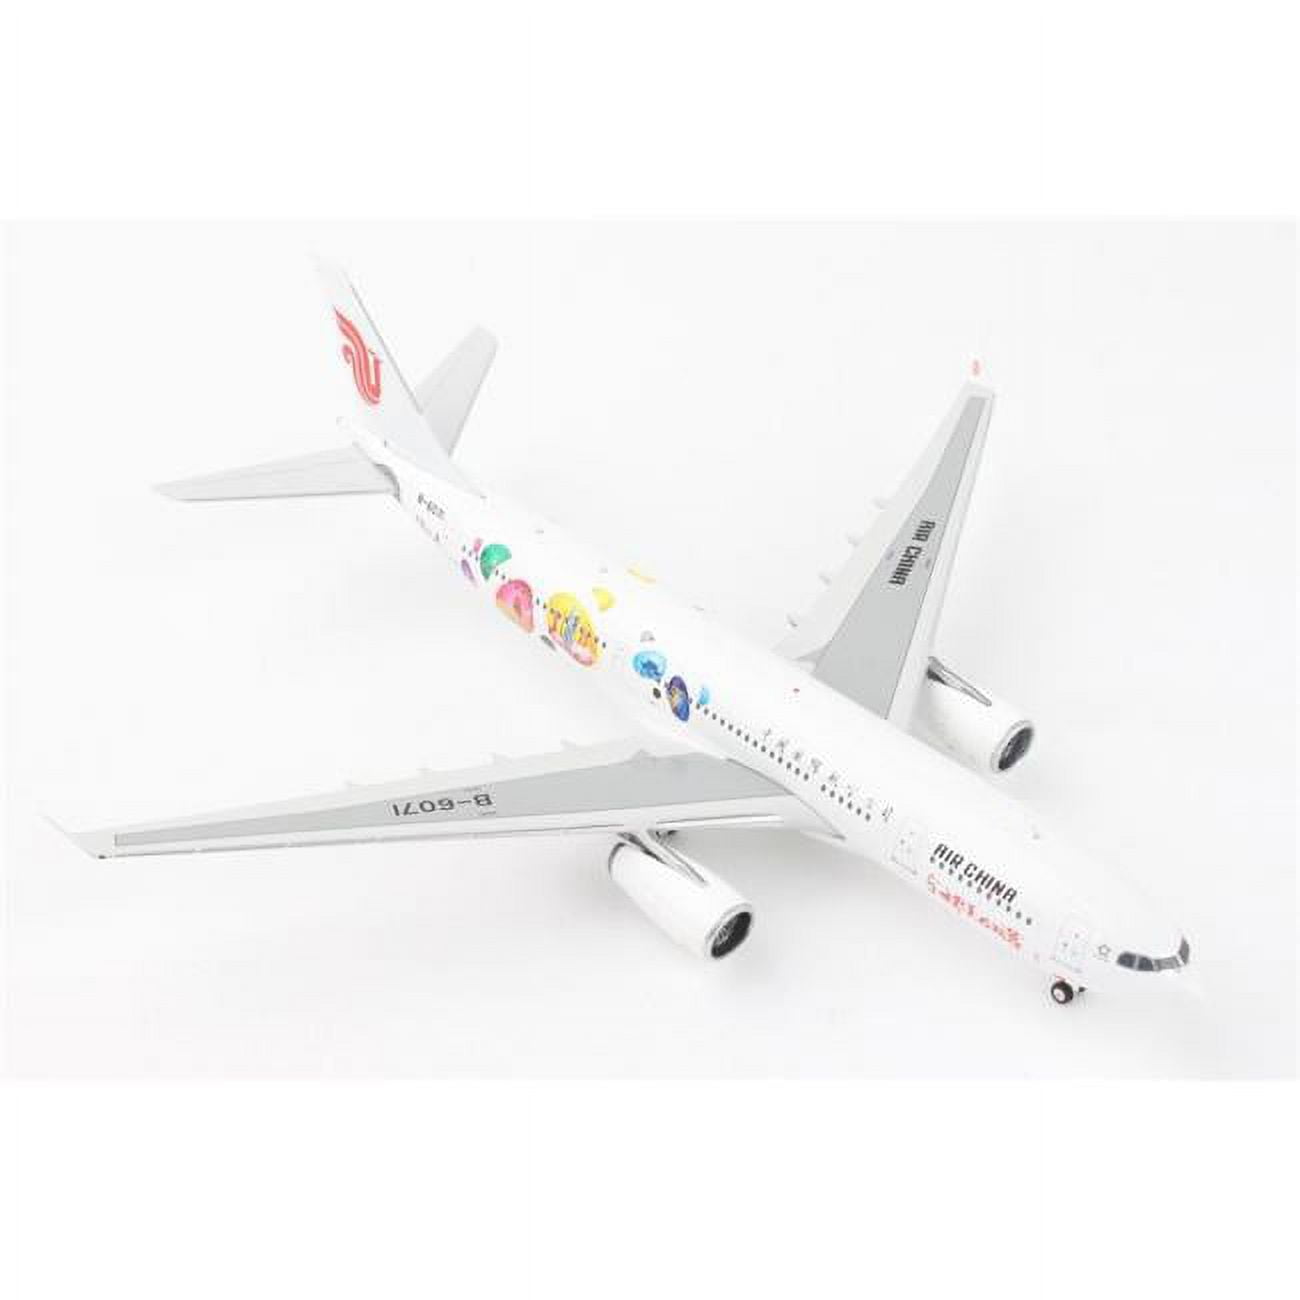 Picture of Phoenix Diecast PH2177 1-400 Scale No.B-6071 Reg Air China A330-200 Model Airplane